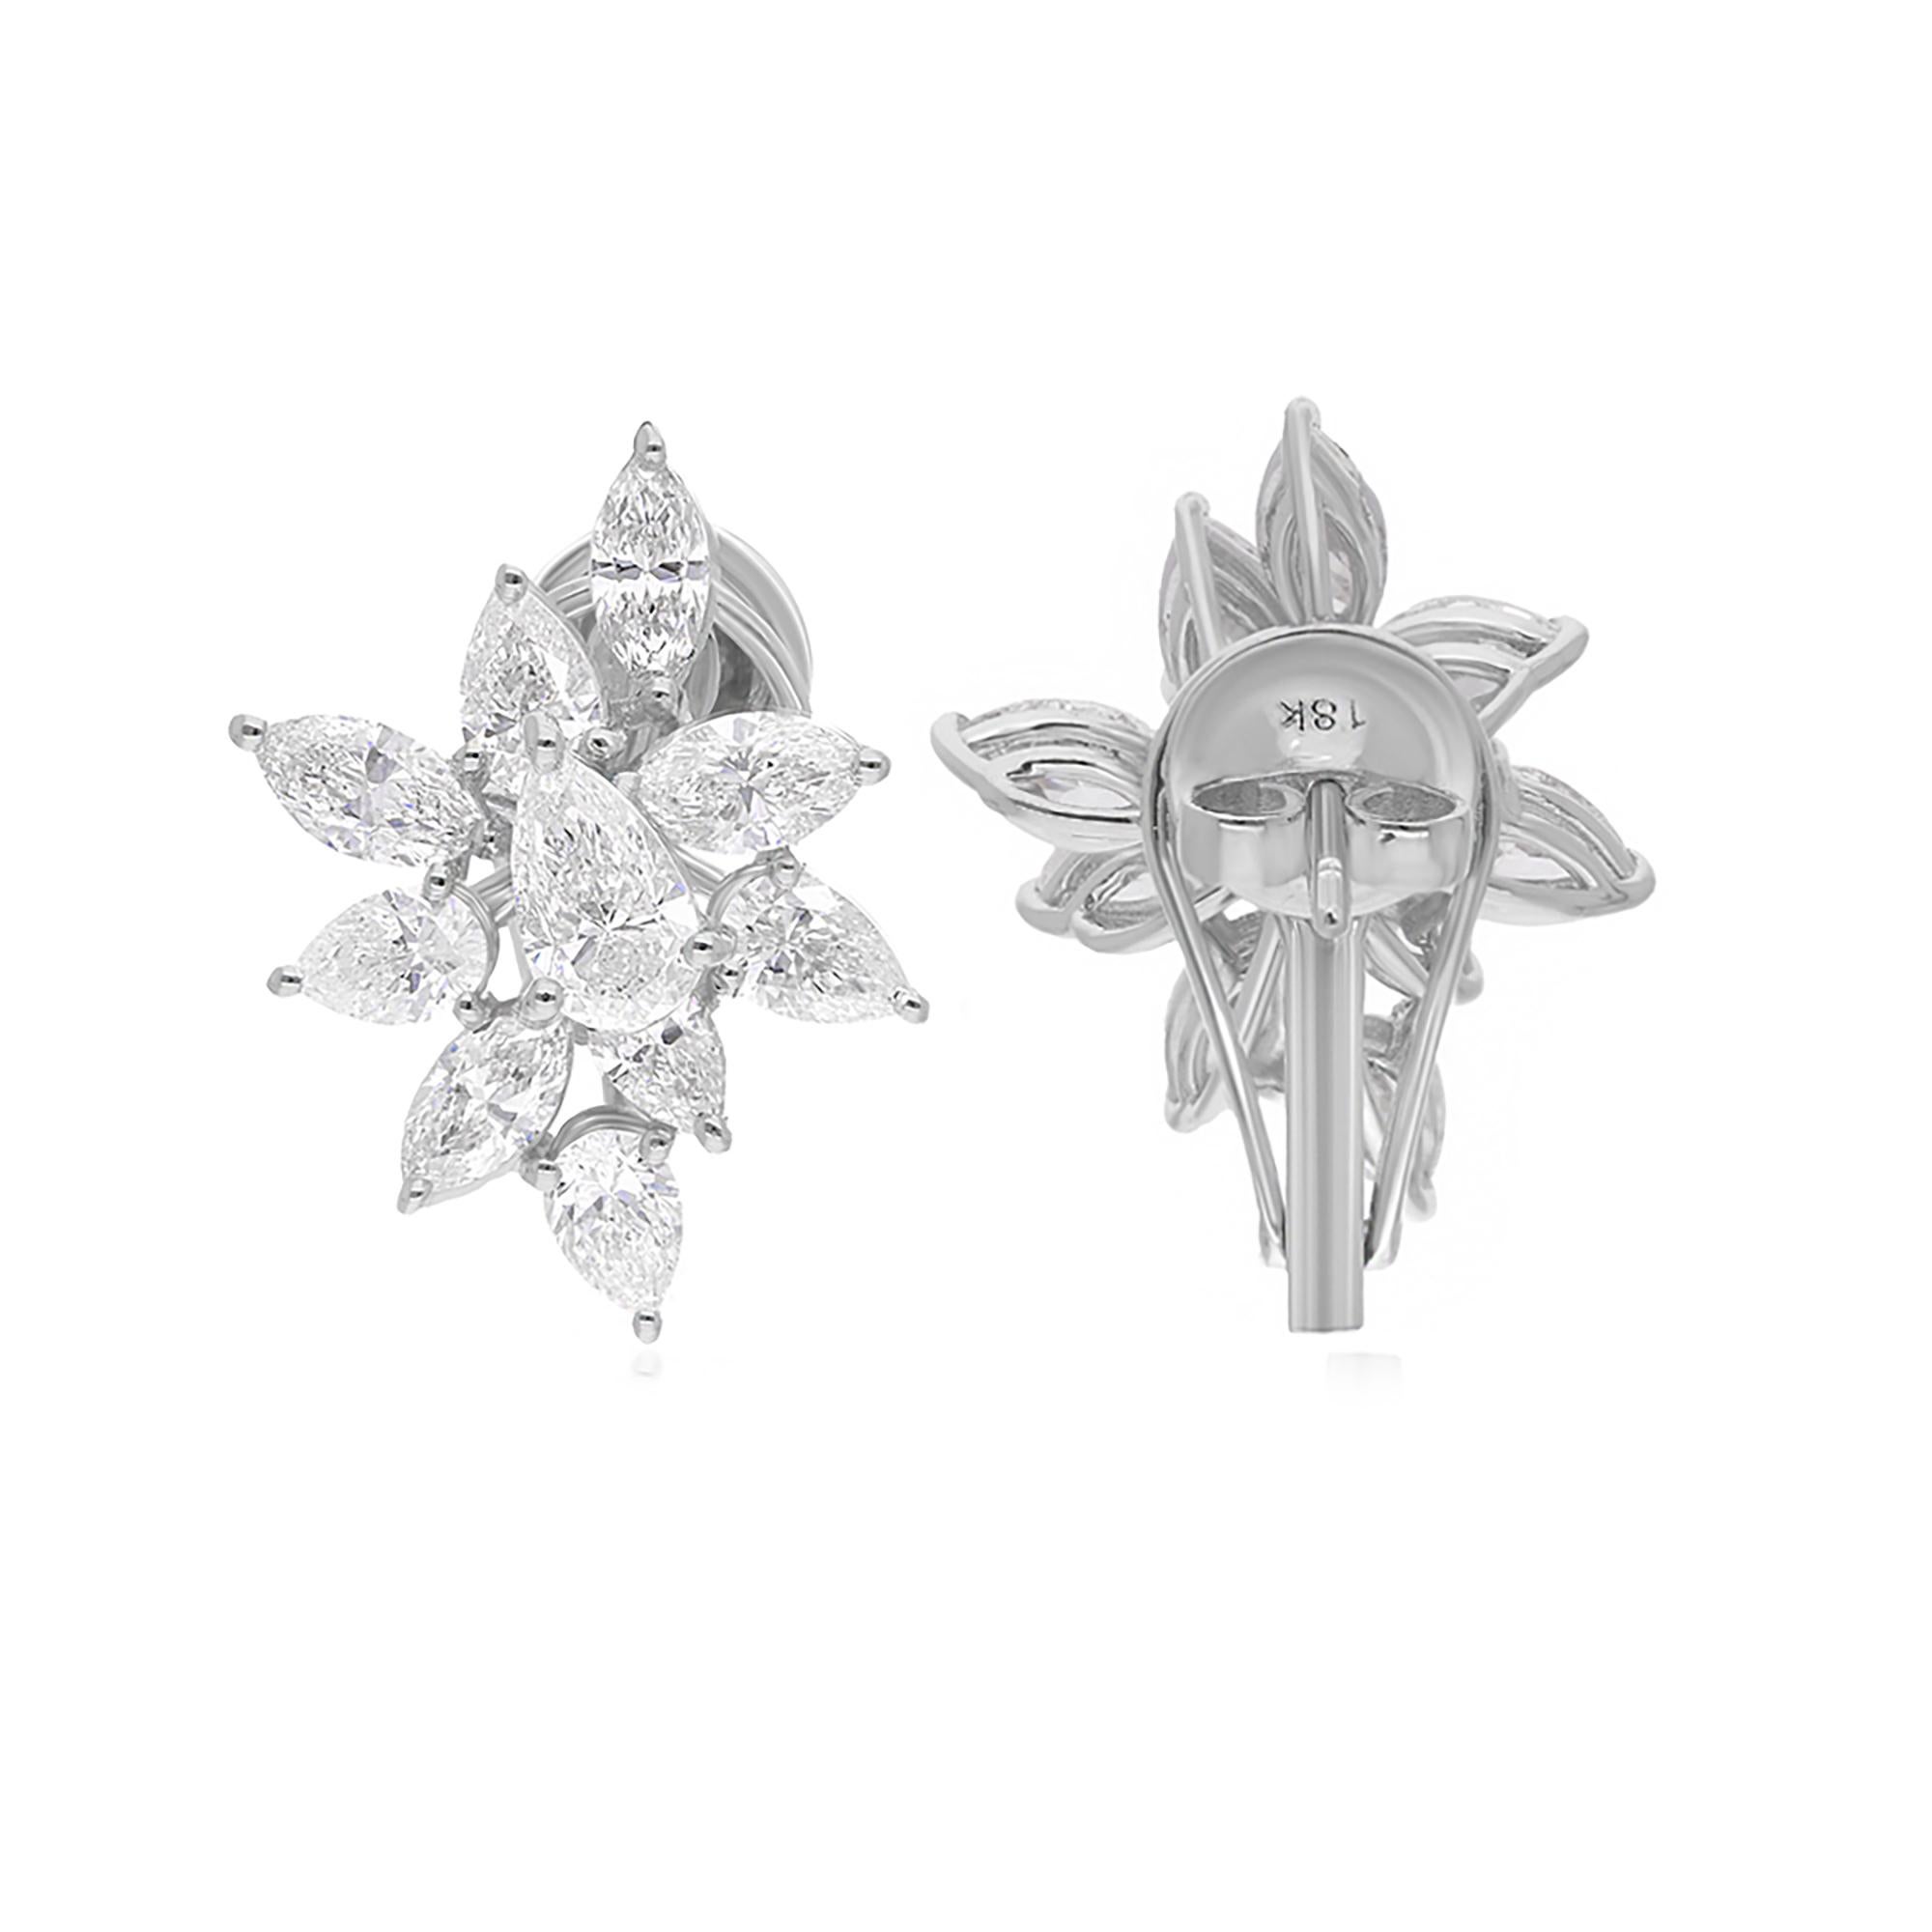 Indulge in the timeless elegance of these stunning 4.07 Carat Pear & Marquise Diamond Stud Earrings, exquisitely crafted in 14 Karat White Gold. A harmonious fusion of classic charm and contemporary sophistication, these earrings are sure to